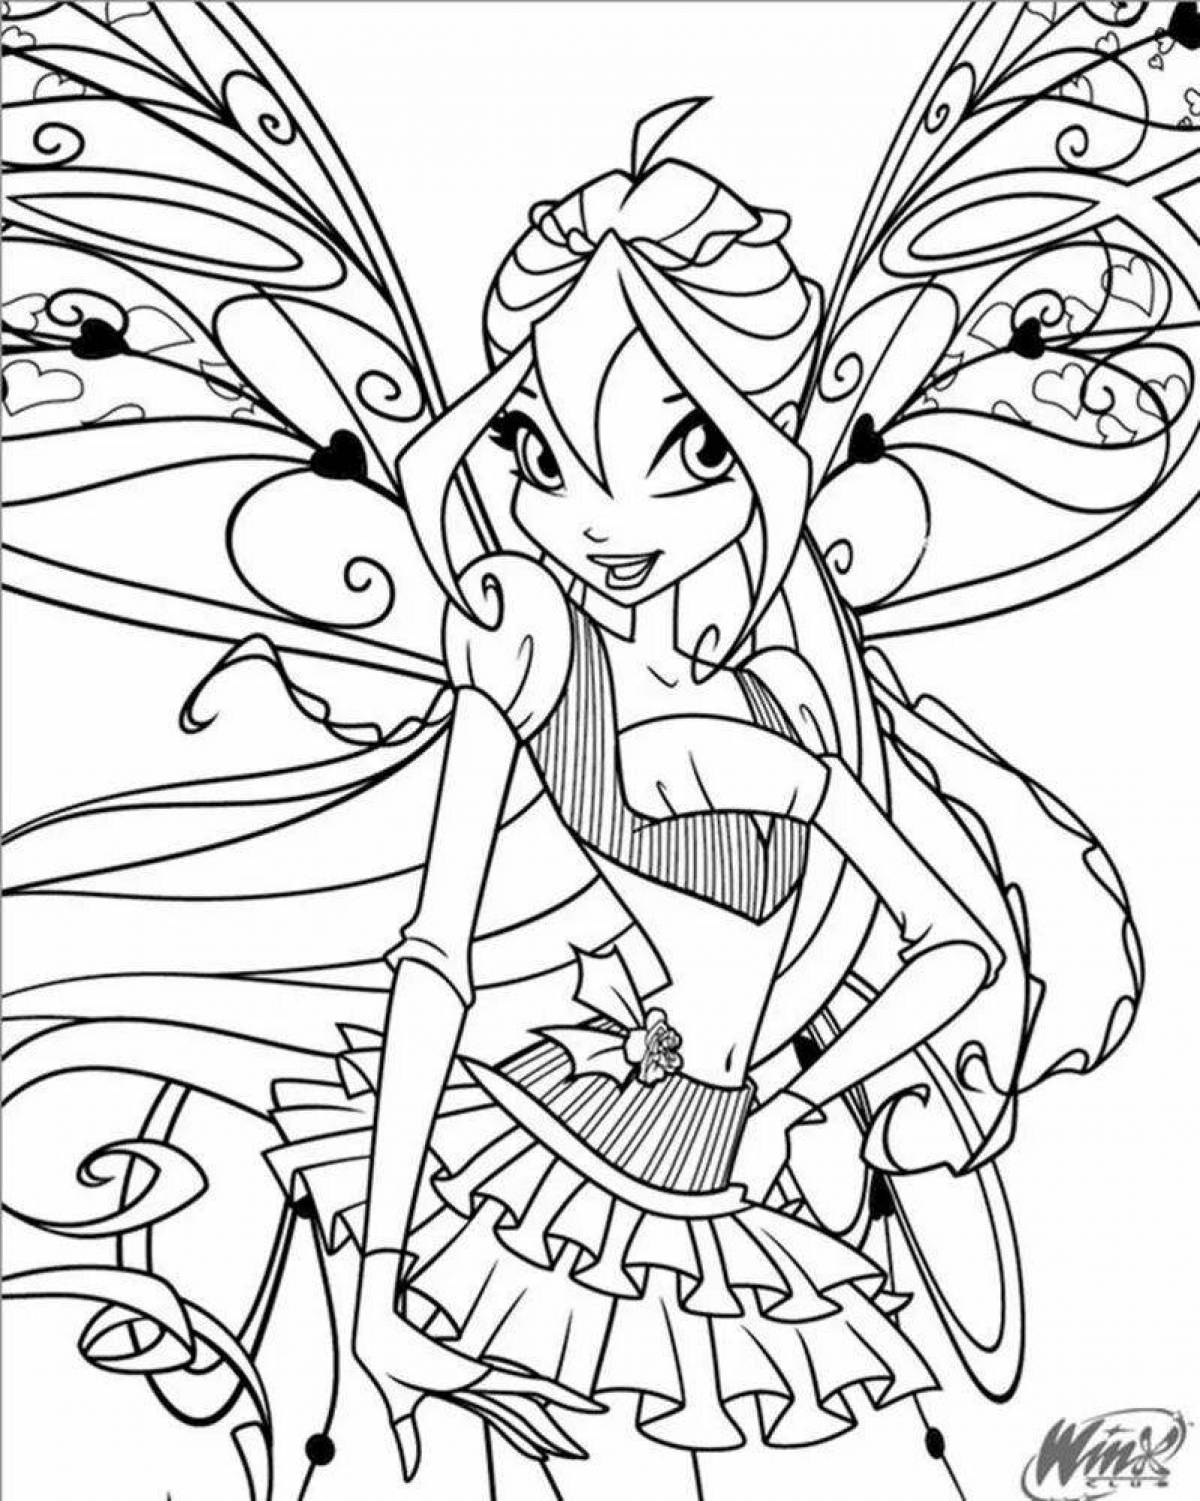 Winx fairy coloring book for girls